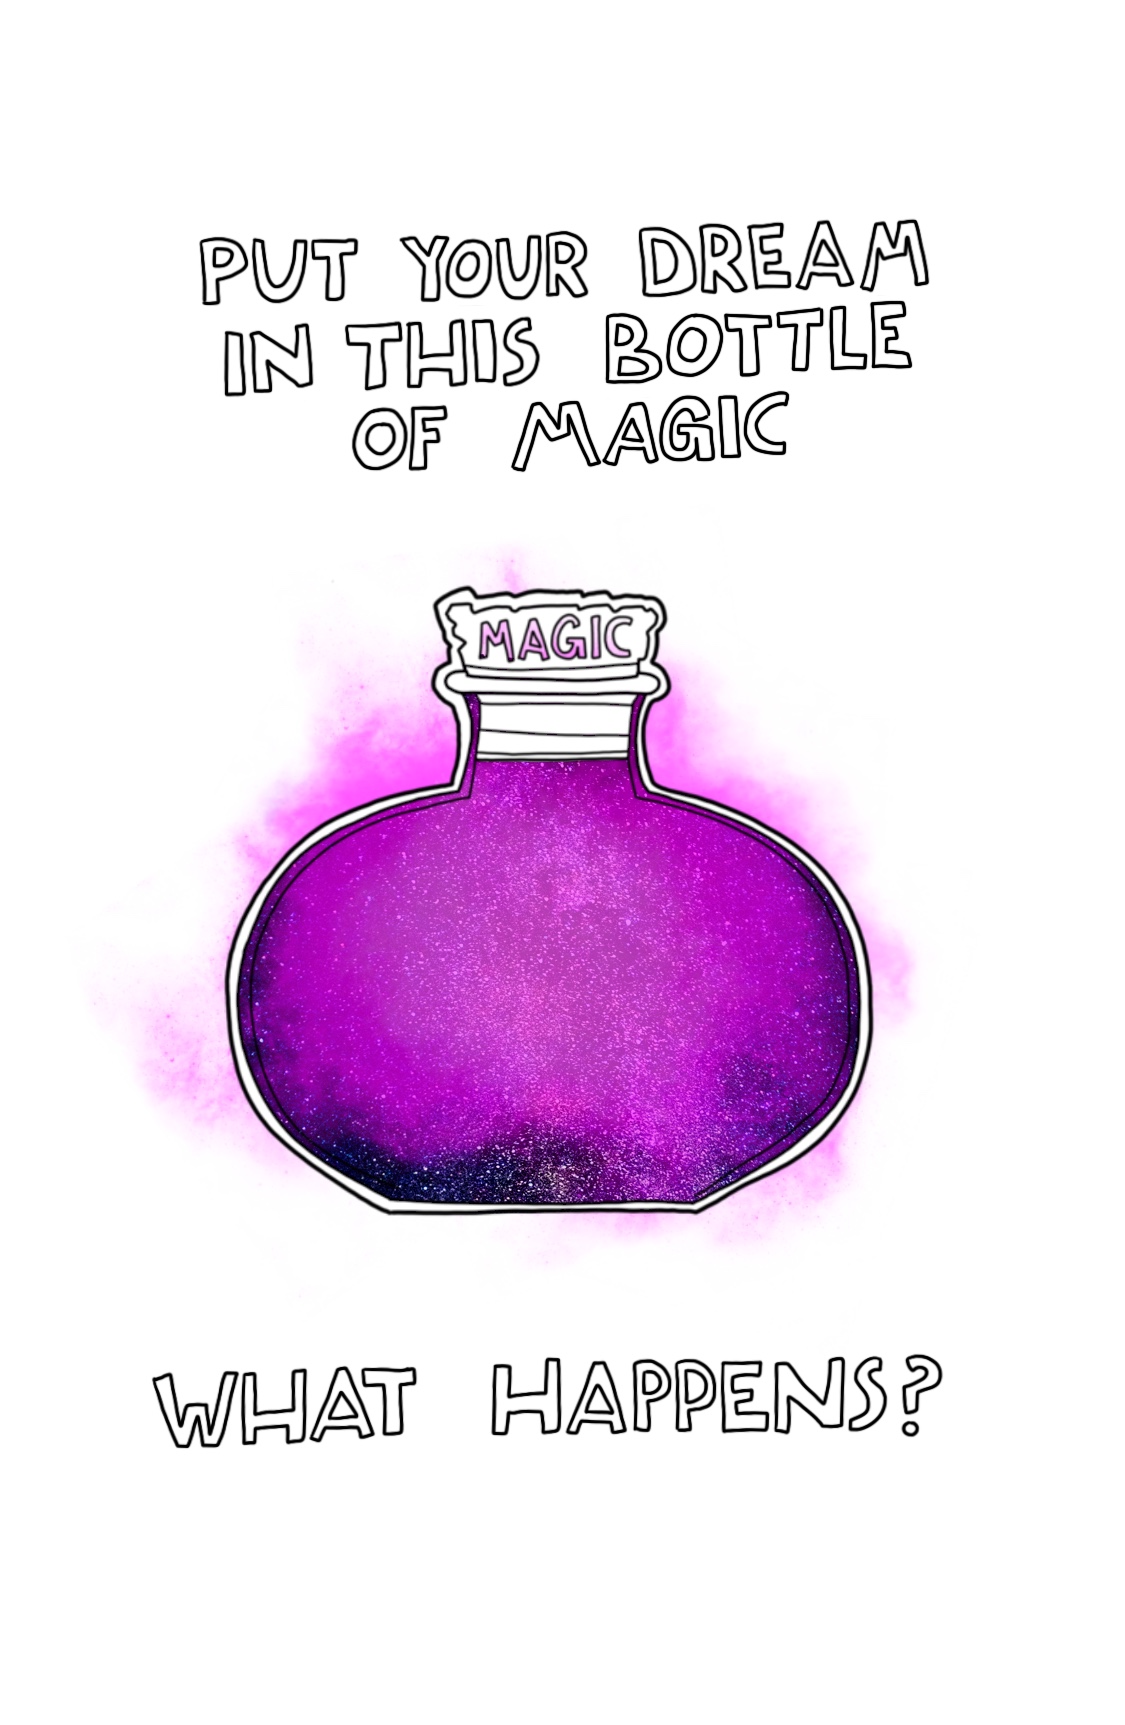 Journal prompt: Put your dream in this bottle of magic. What happens?